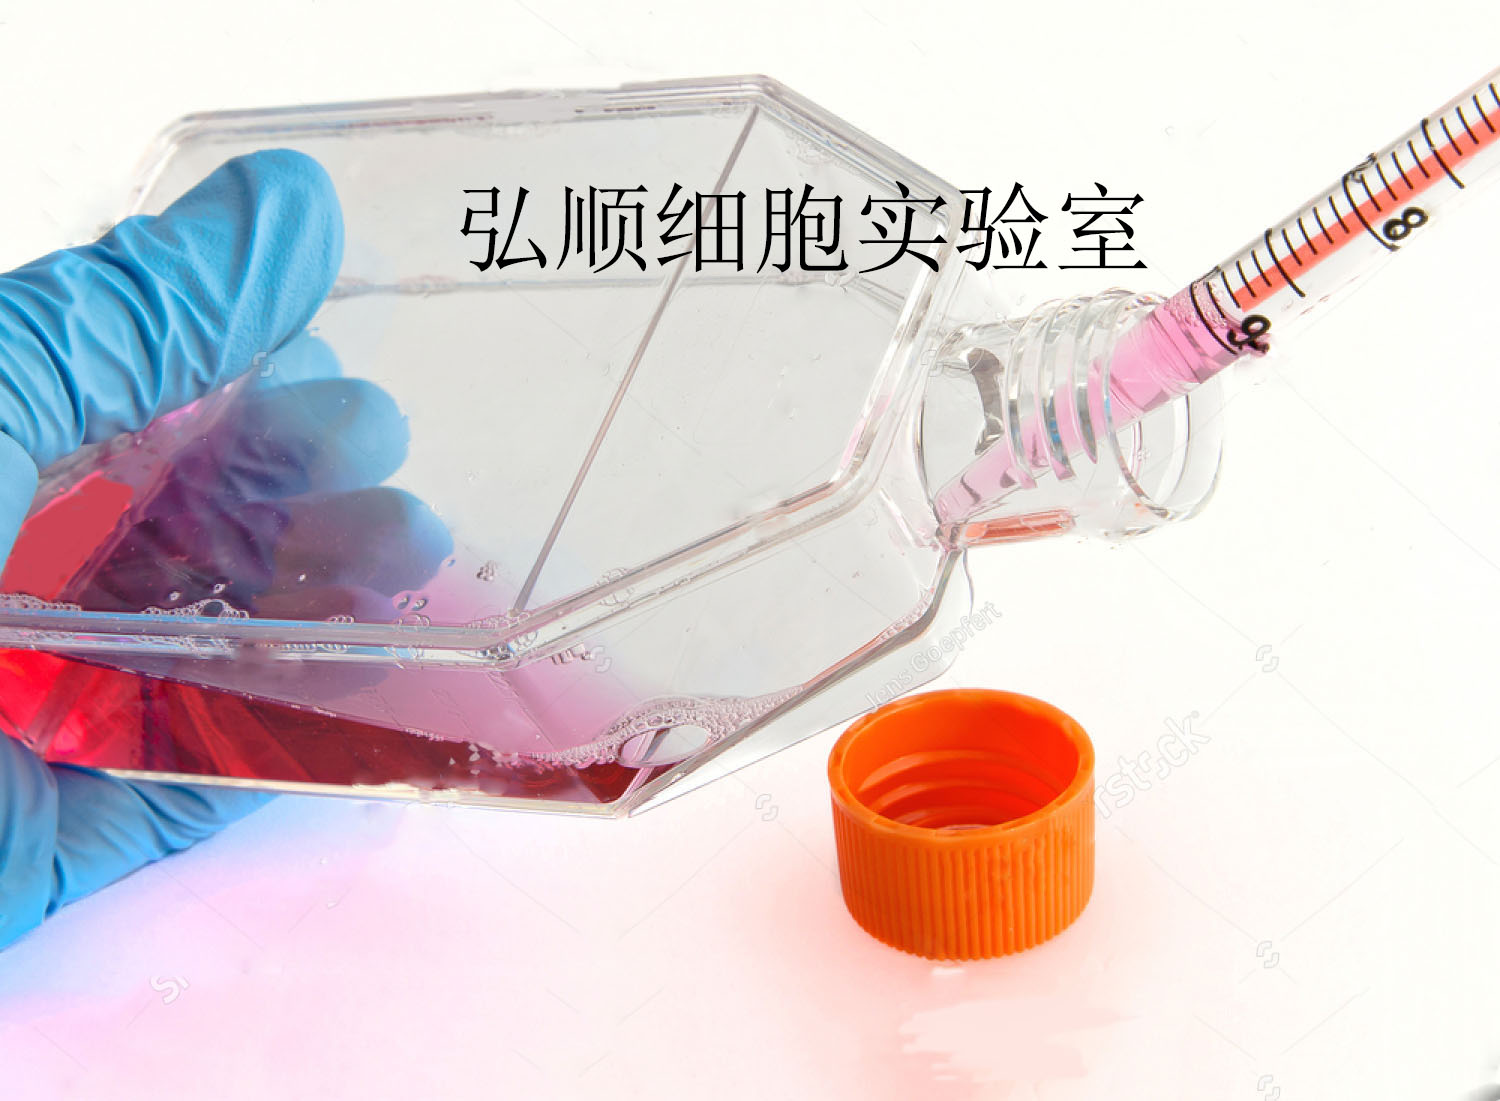 LAC细胞：人肺癌细胞,LAC Cell